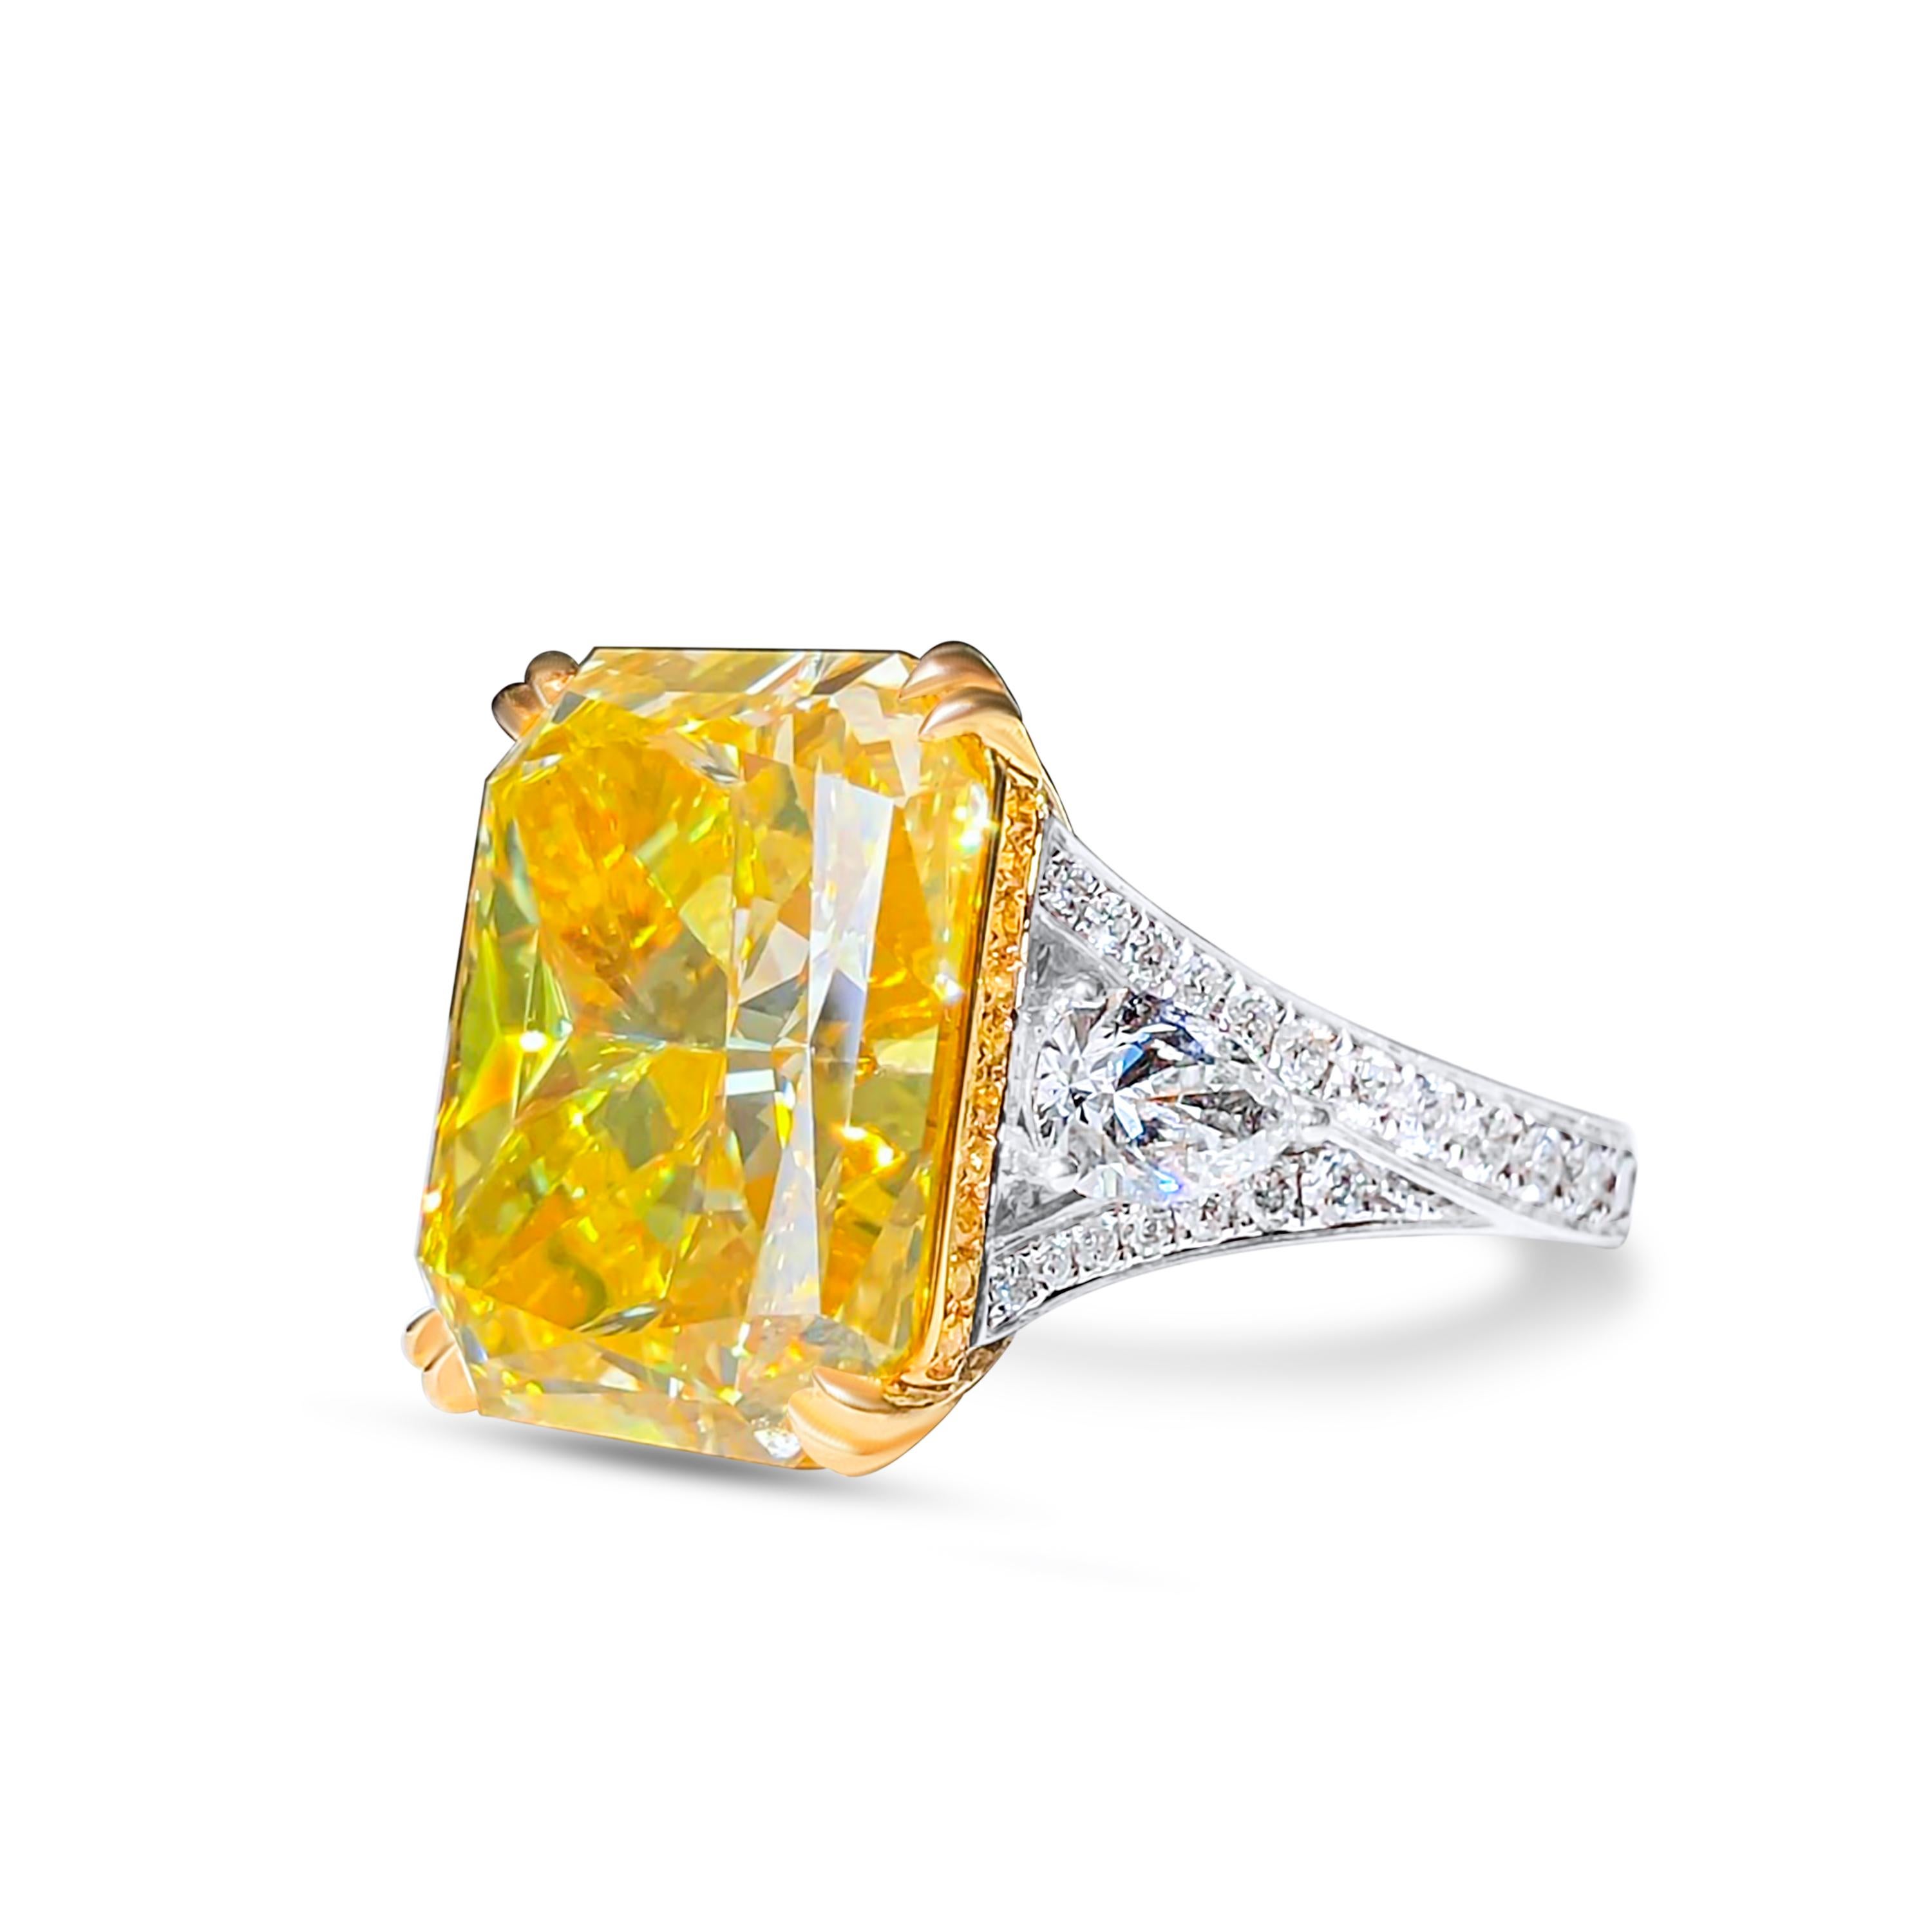 Art Deco Majestic GIA Certified 20.06 Carat Cushion Cut Yellow Diamond Cocktail Ring For Sale